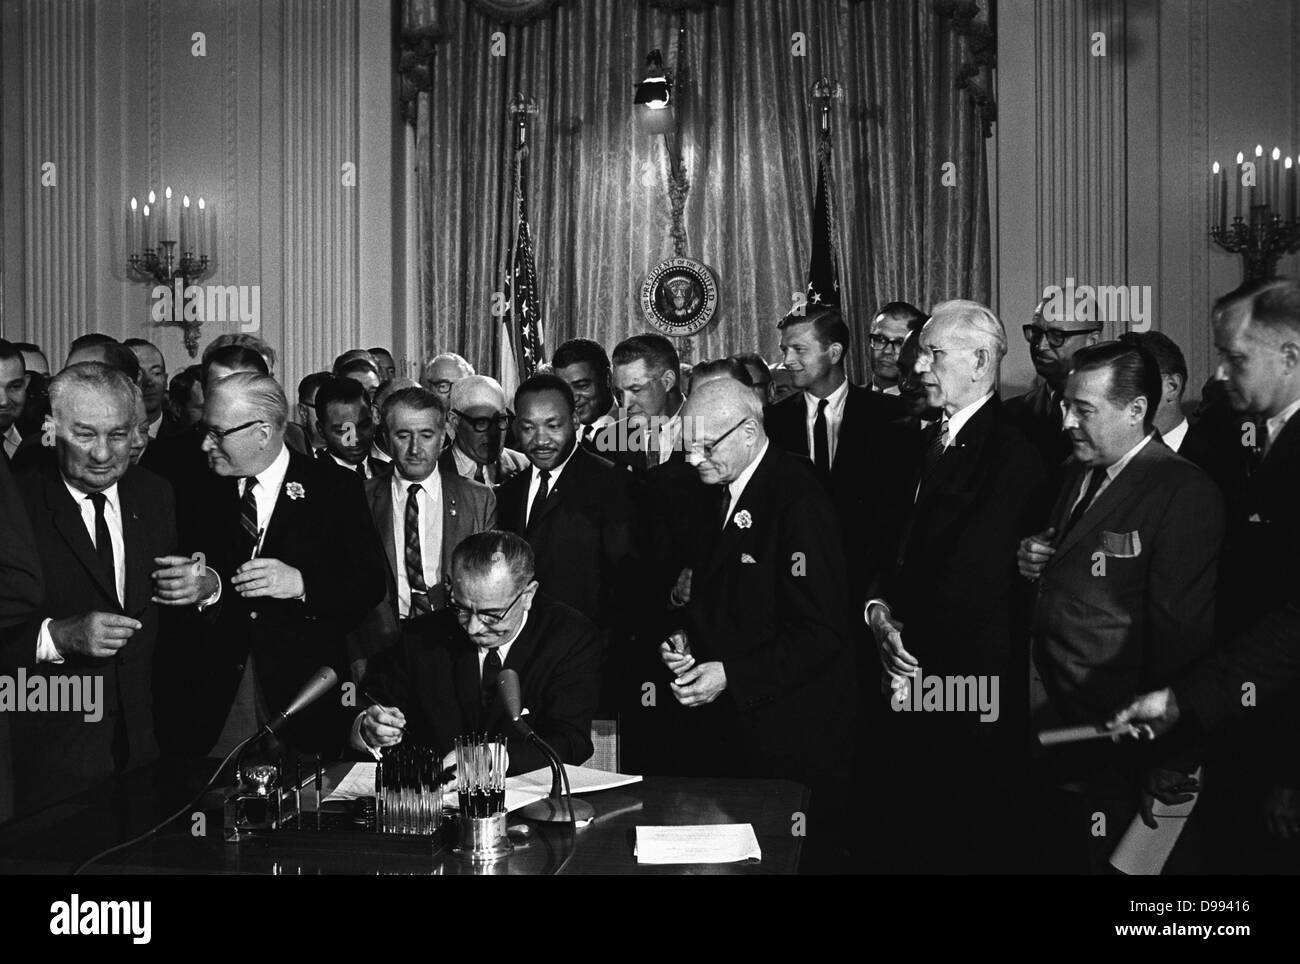 Lyndon Baines Johnson (1908 – 1973), referred to as LBJ, served as the 36th President of the United States from 1963 to 1969. Lyndon Johnson signing the Civil Rights Act, 2 July 1964. Martin Luther king Jnr. looks on behind the President Stock Photo